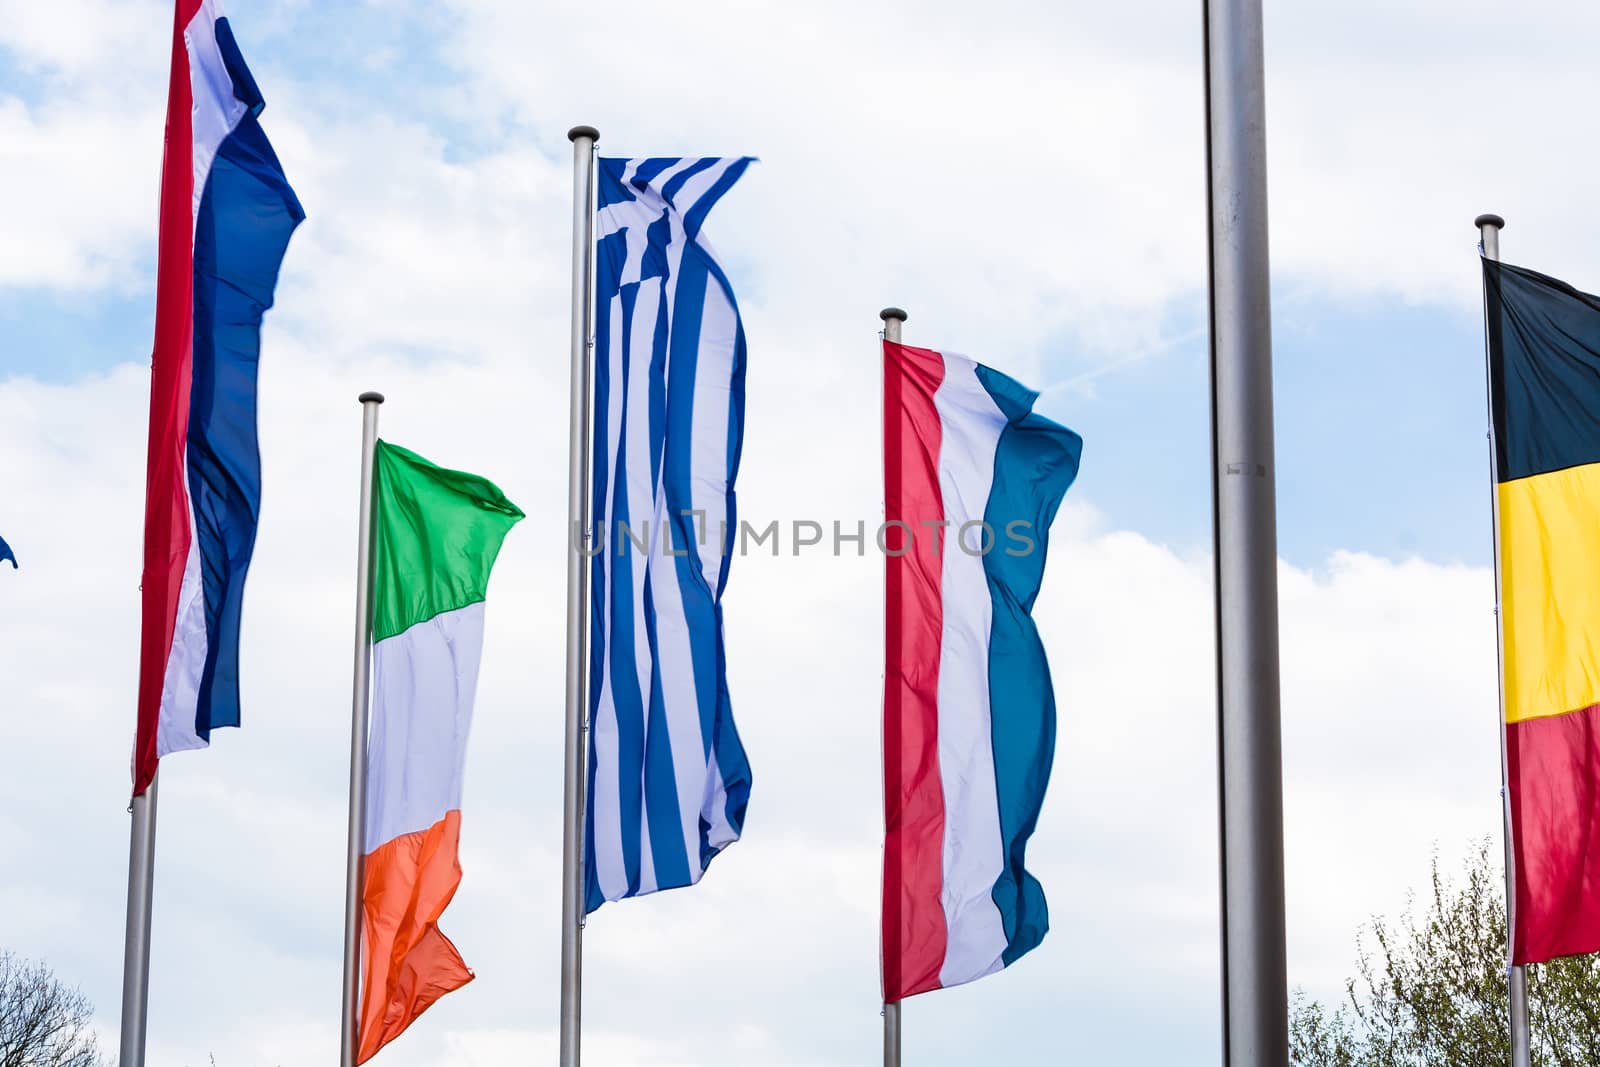 Several Europe countries flags arranged in front of a blue sky.